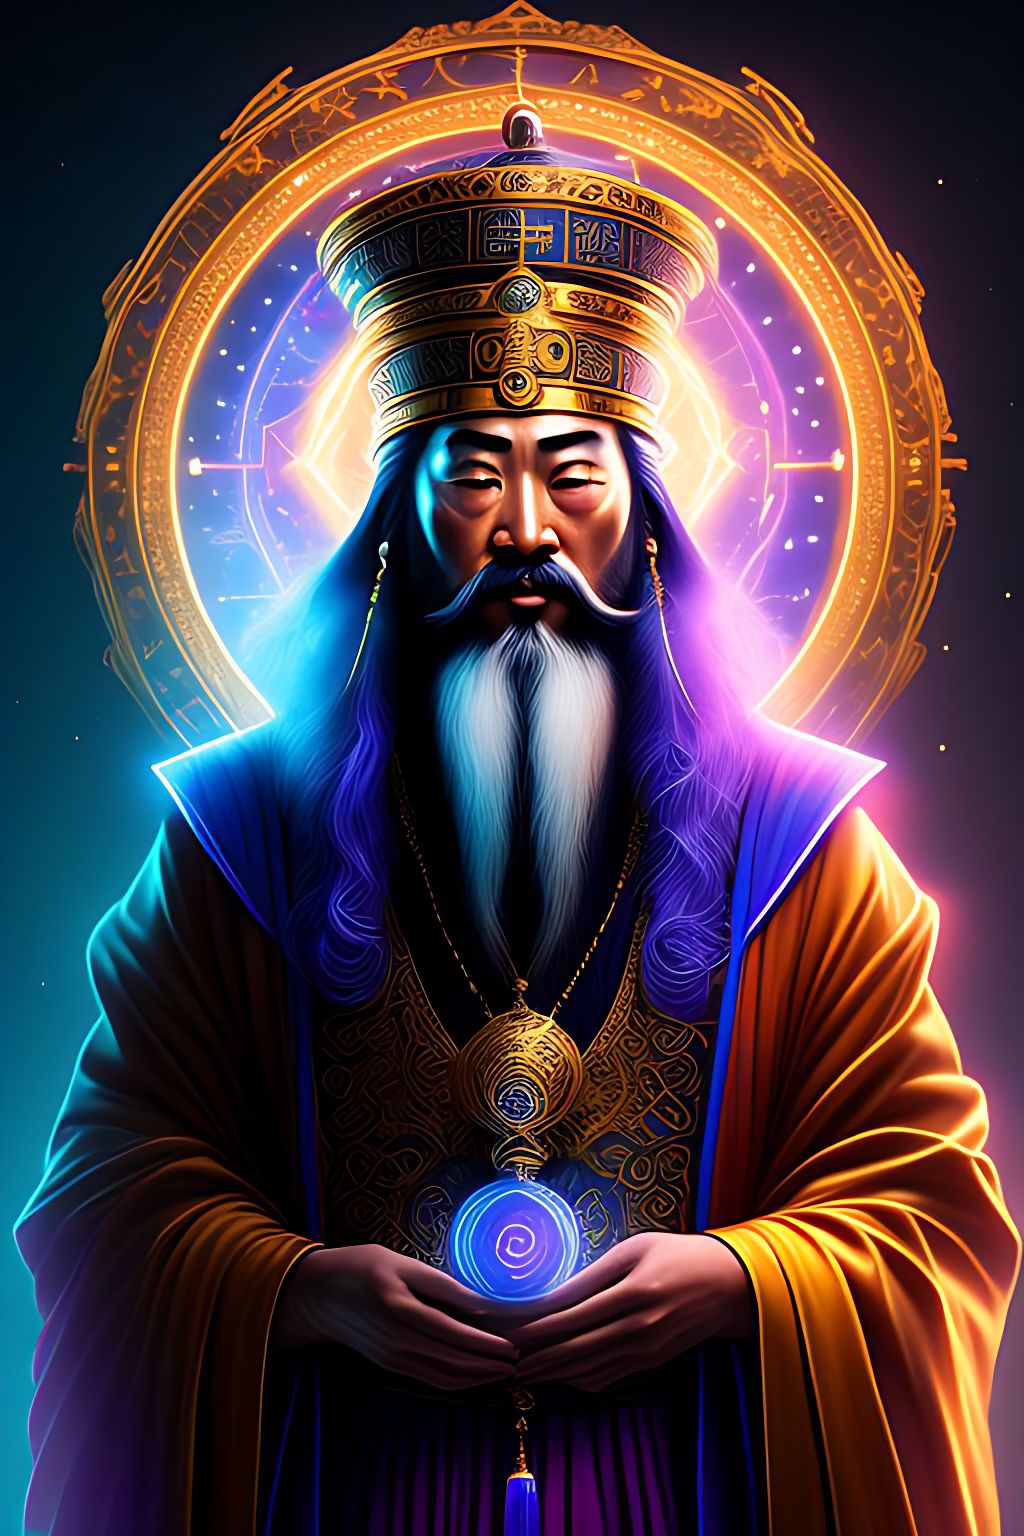 Chinese fortune teller, Confucius, mystical, magic, light skin color, robe in gold details, long beard
 

, Detailed, Intricate, scientific, mathematical, Digital art, blue and purple lighting, Futuristic, by artificial intelligence, trending on artstation.